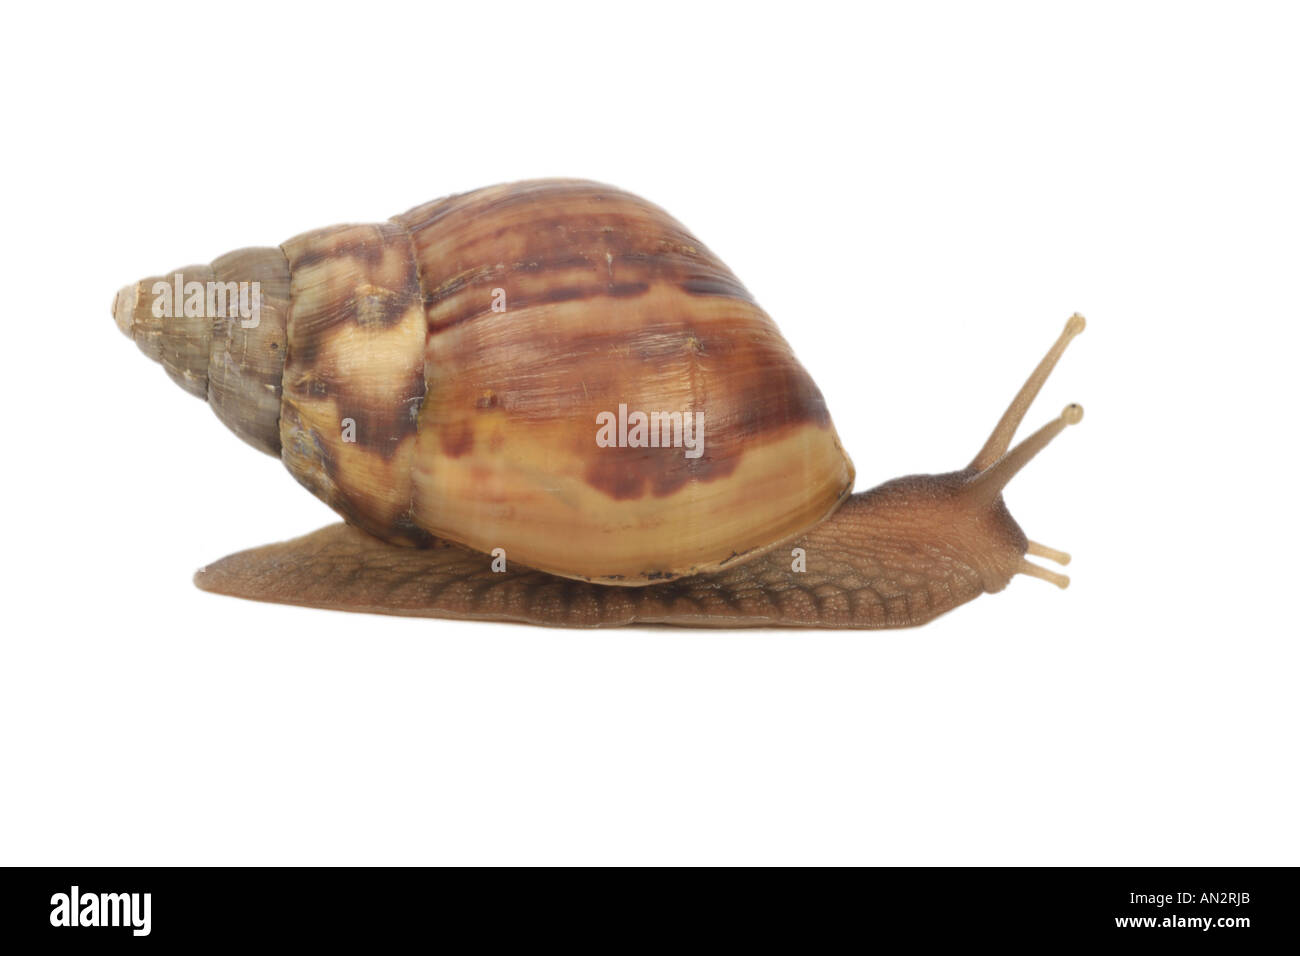 giant African snail, giant African land snail (Achatina fulica) Stock Photo